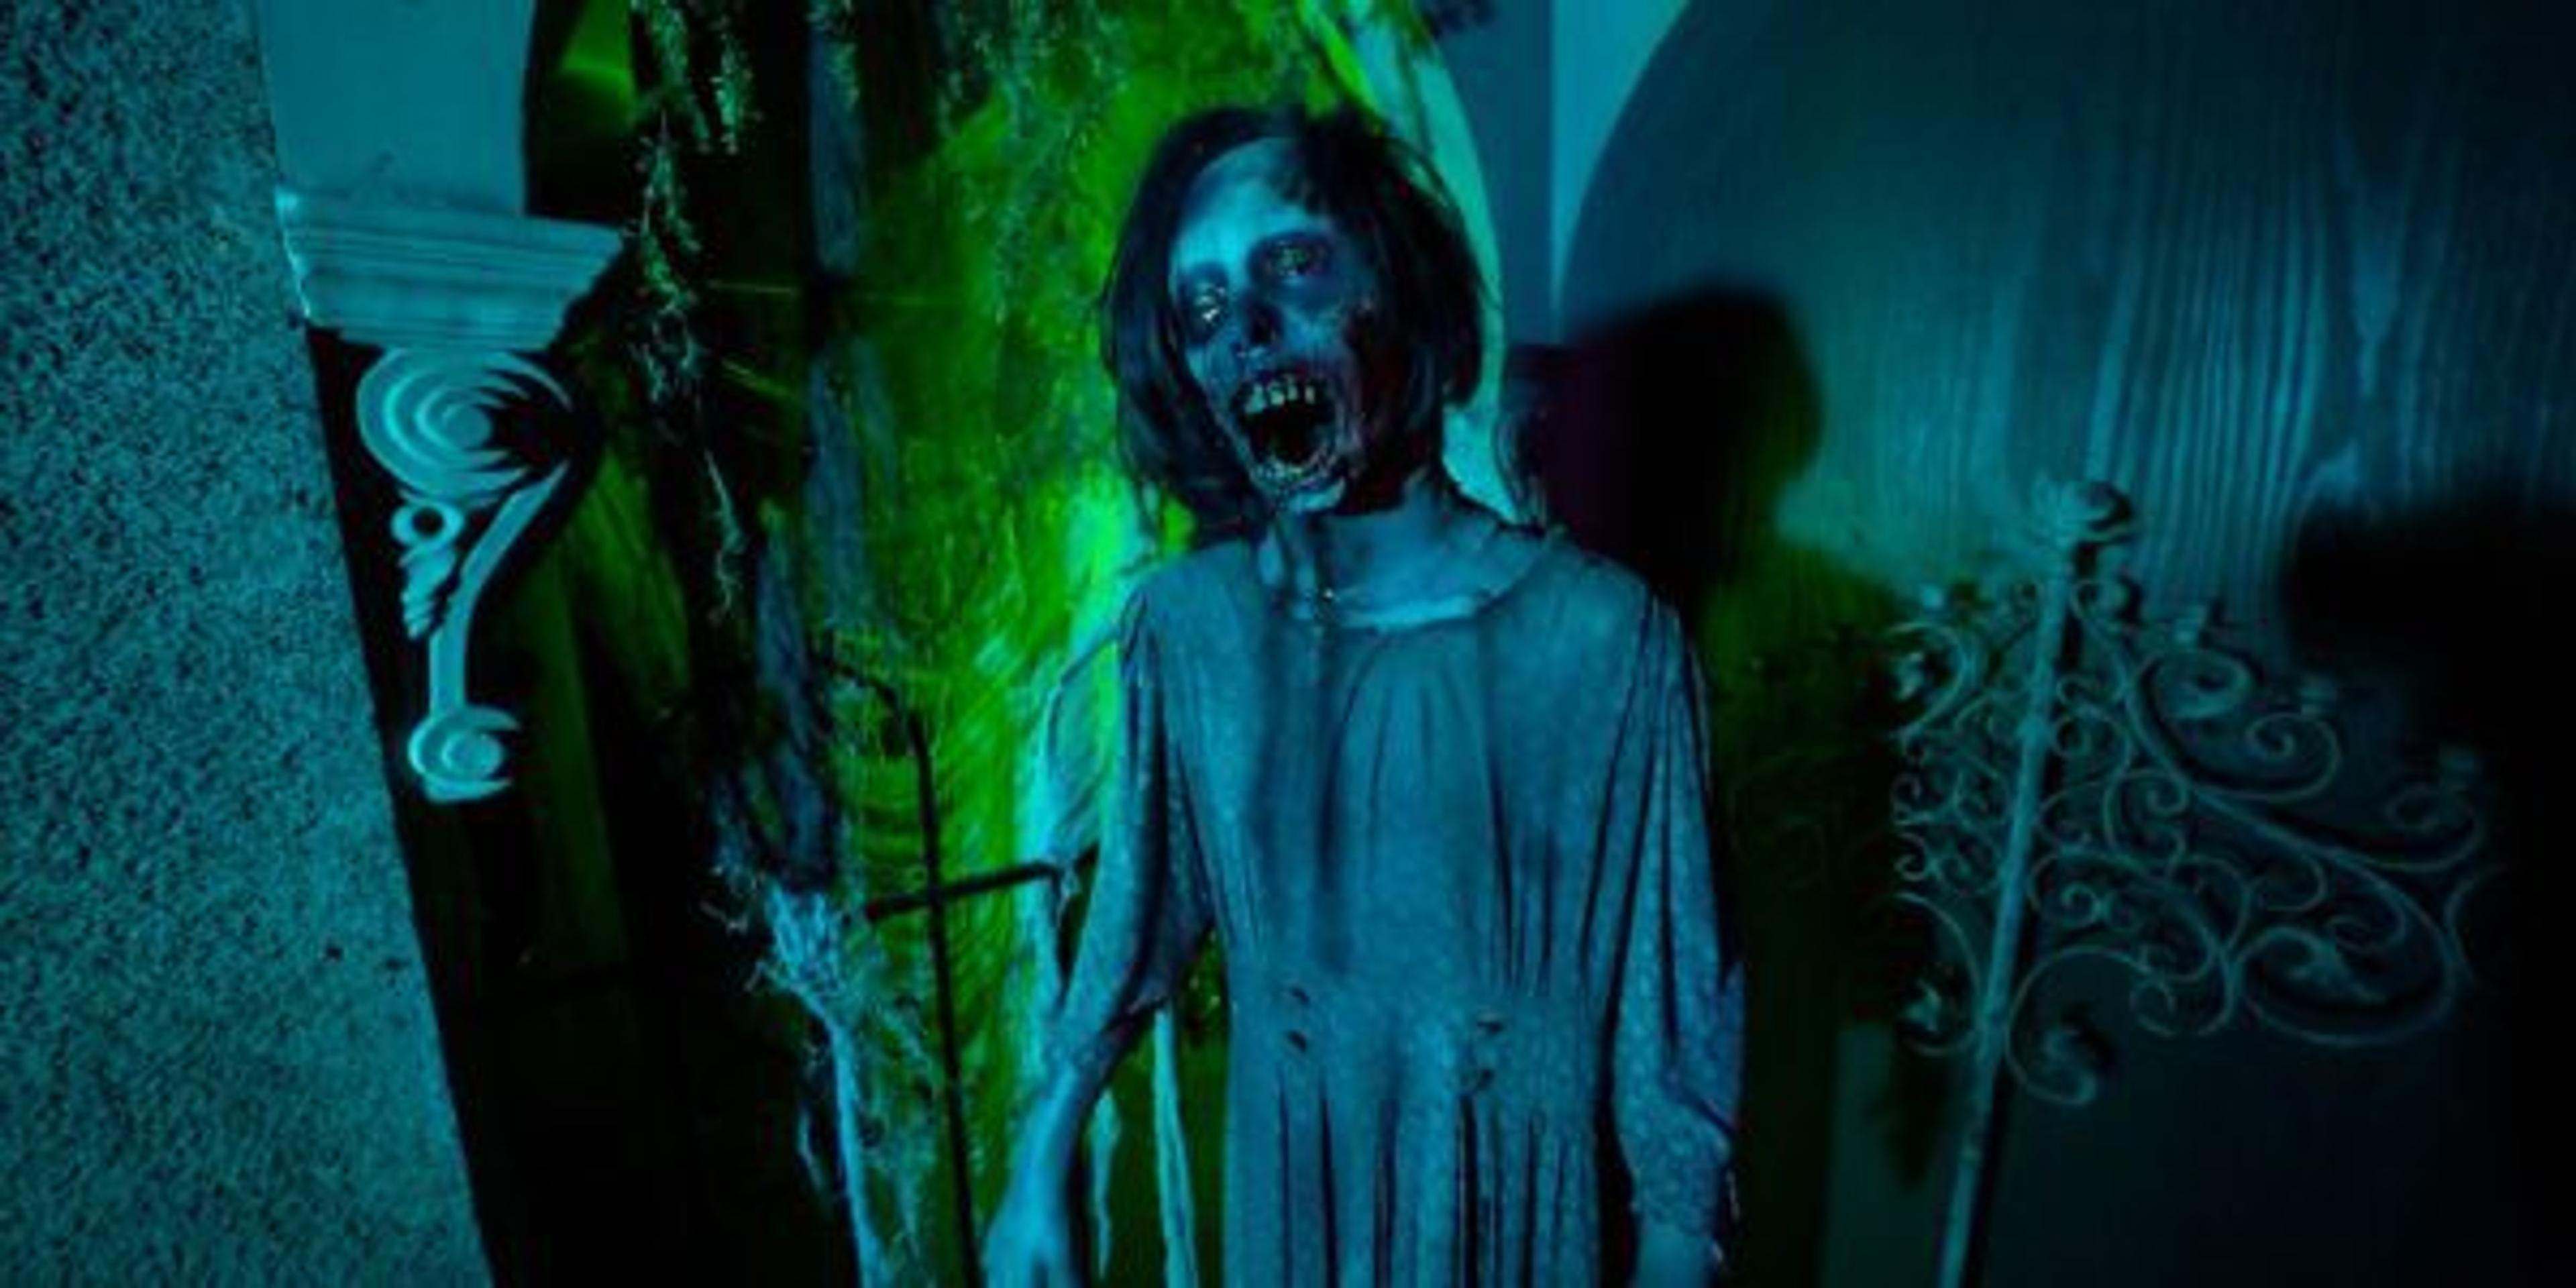 Some of Michigan’s best and longest-running haunted houses are opening back up for the fall season. Check out this list of 15 of the scariest haunted attractions the state. Happy haunting! 